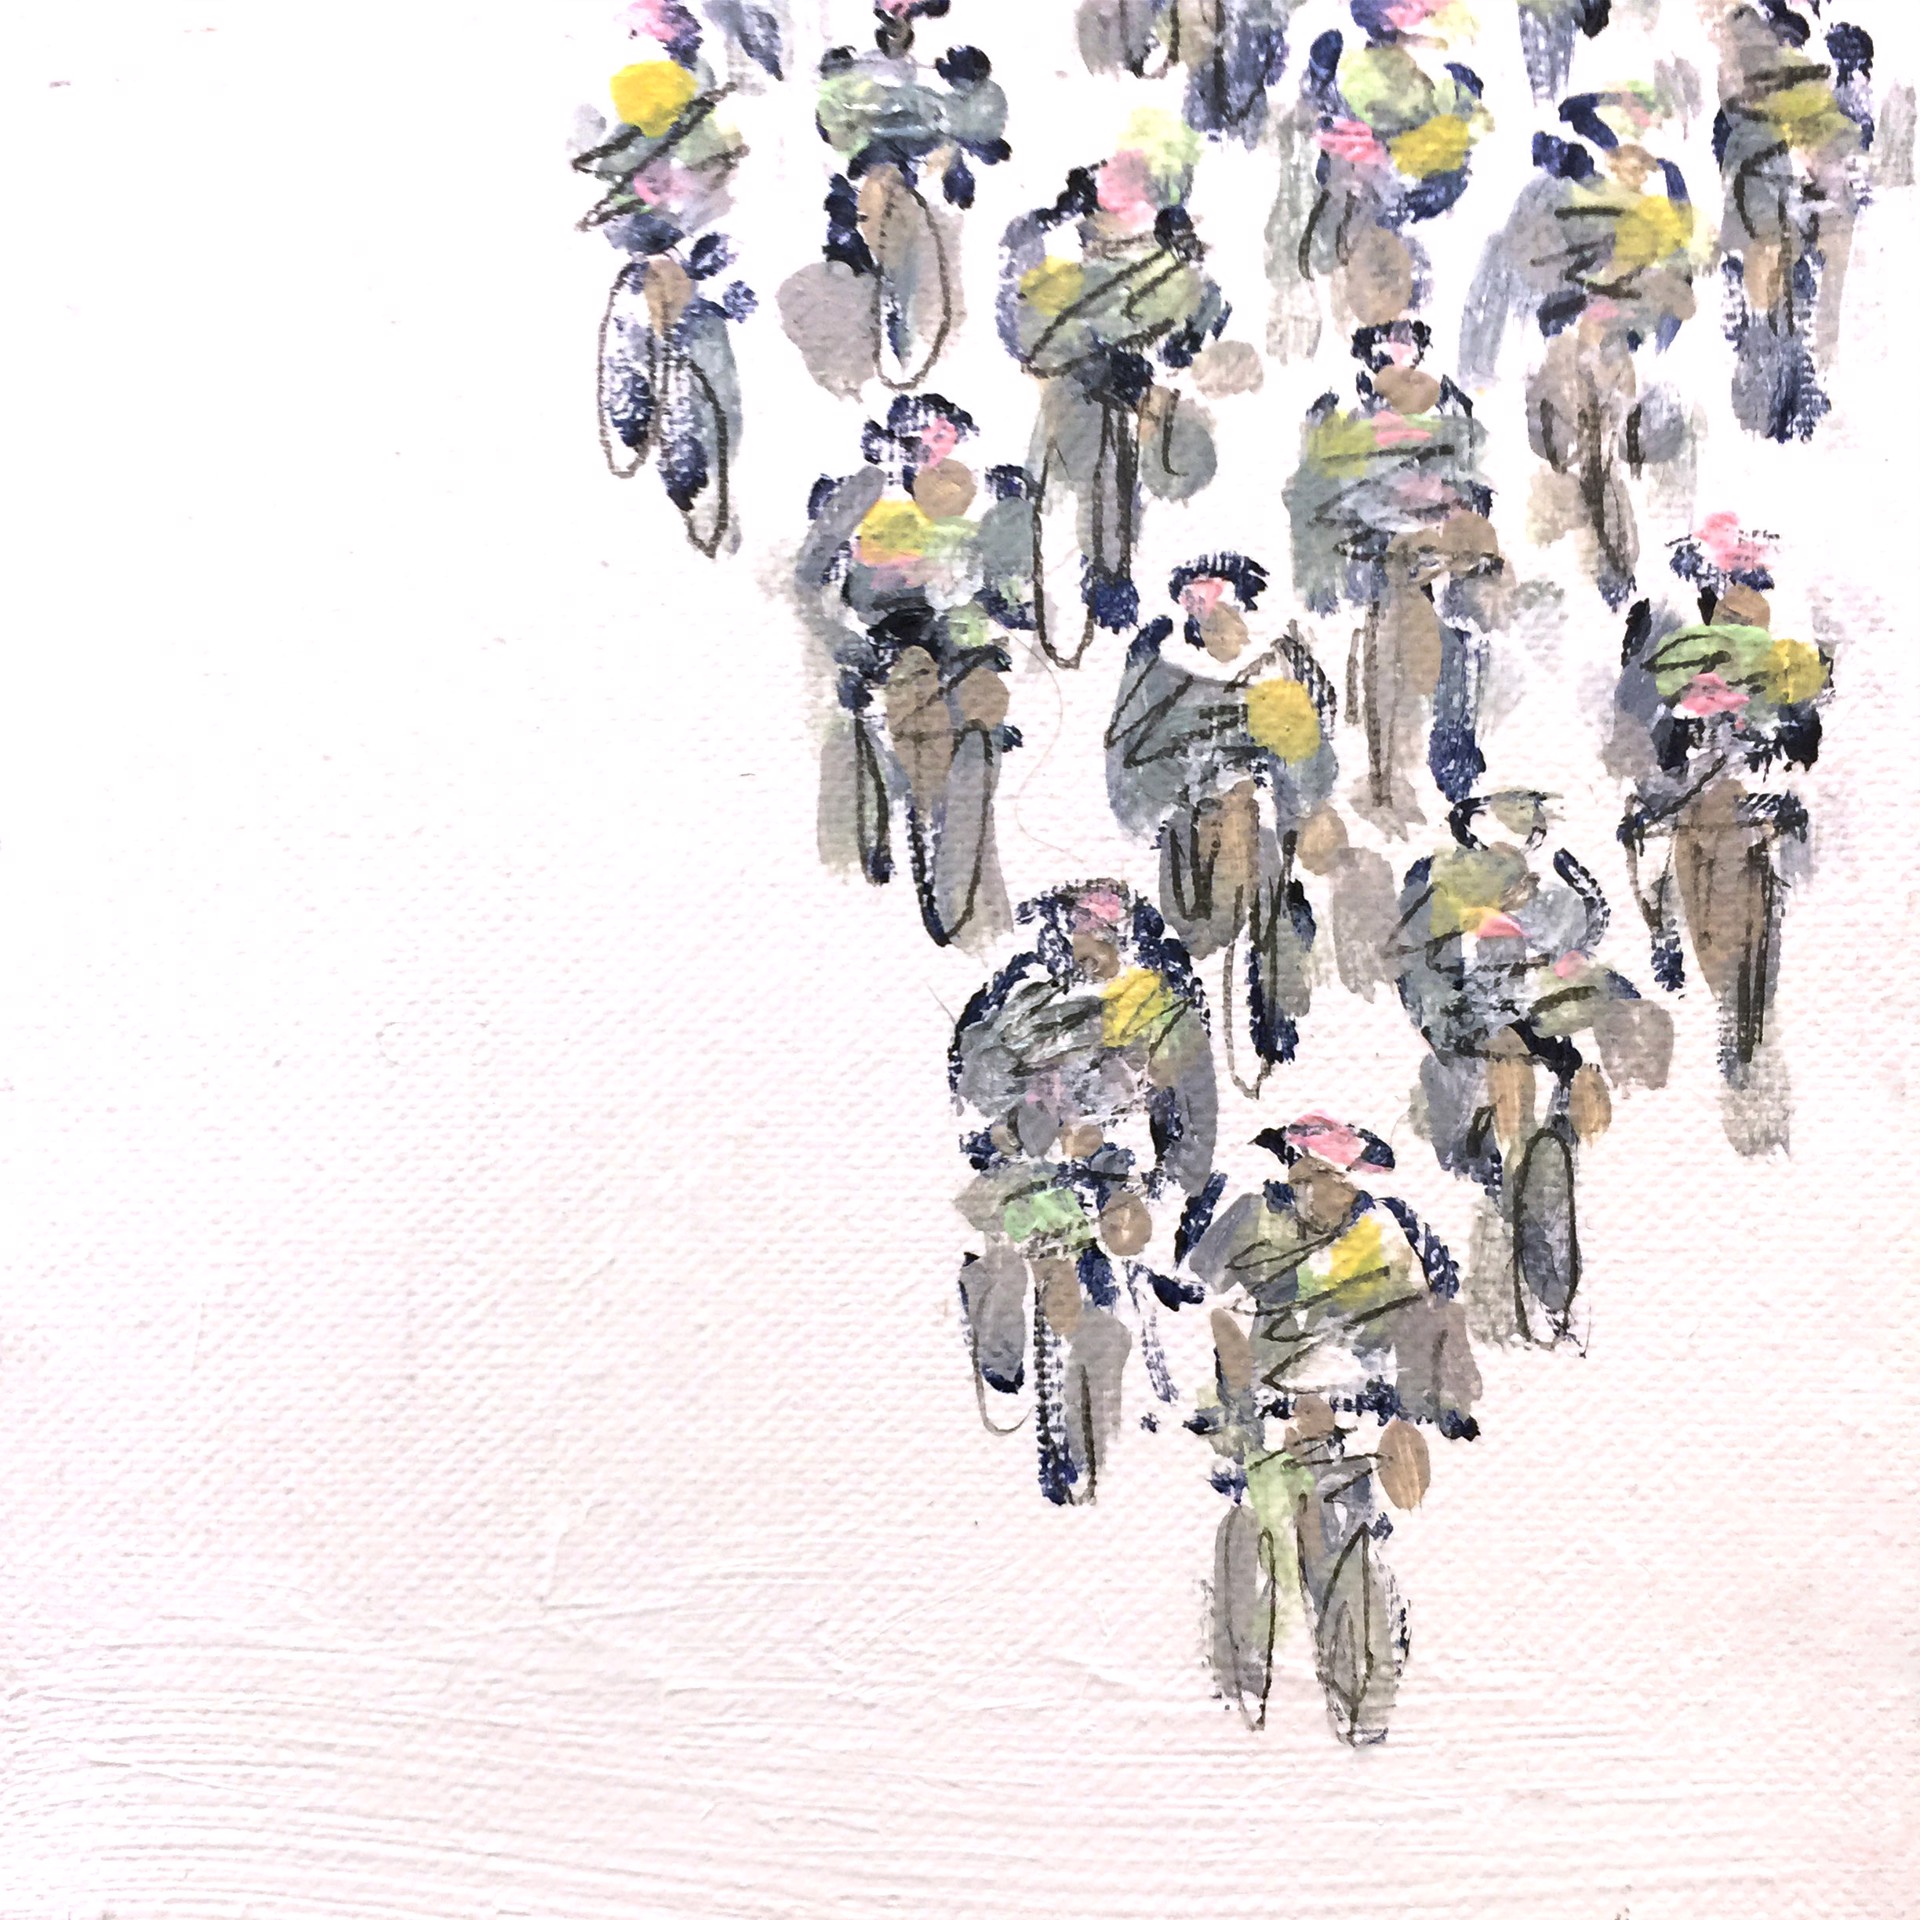 Sparse Cyclists on White by Heather Blanton